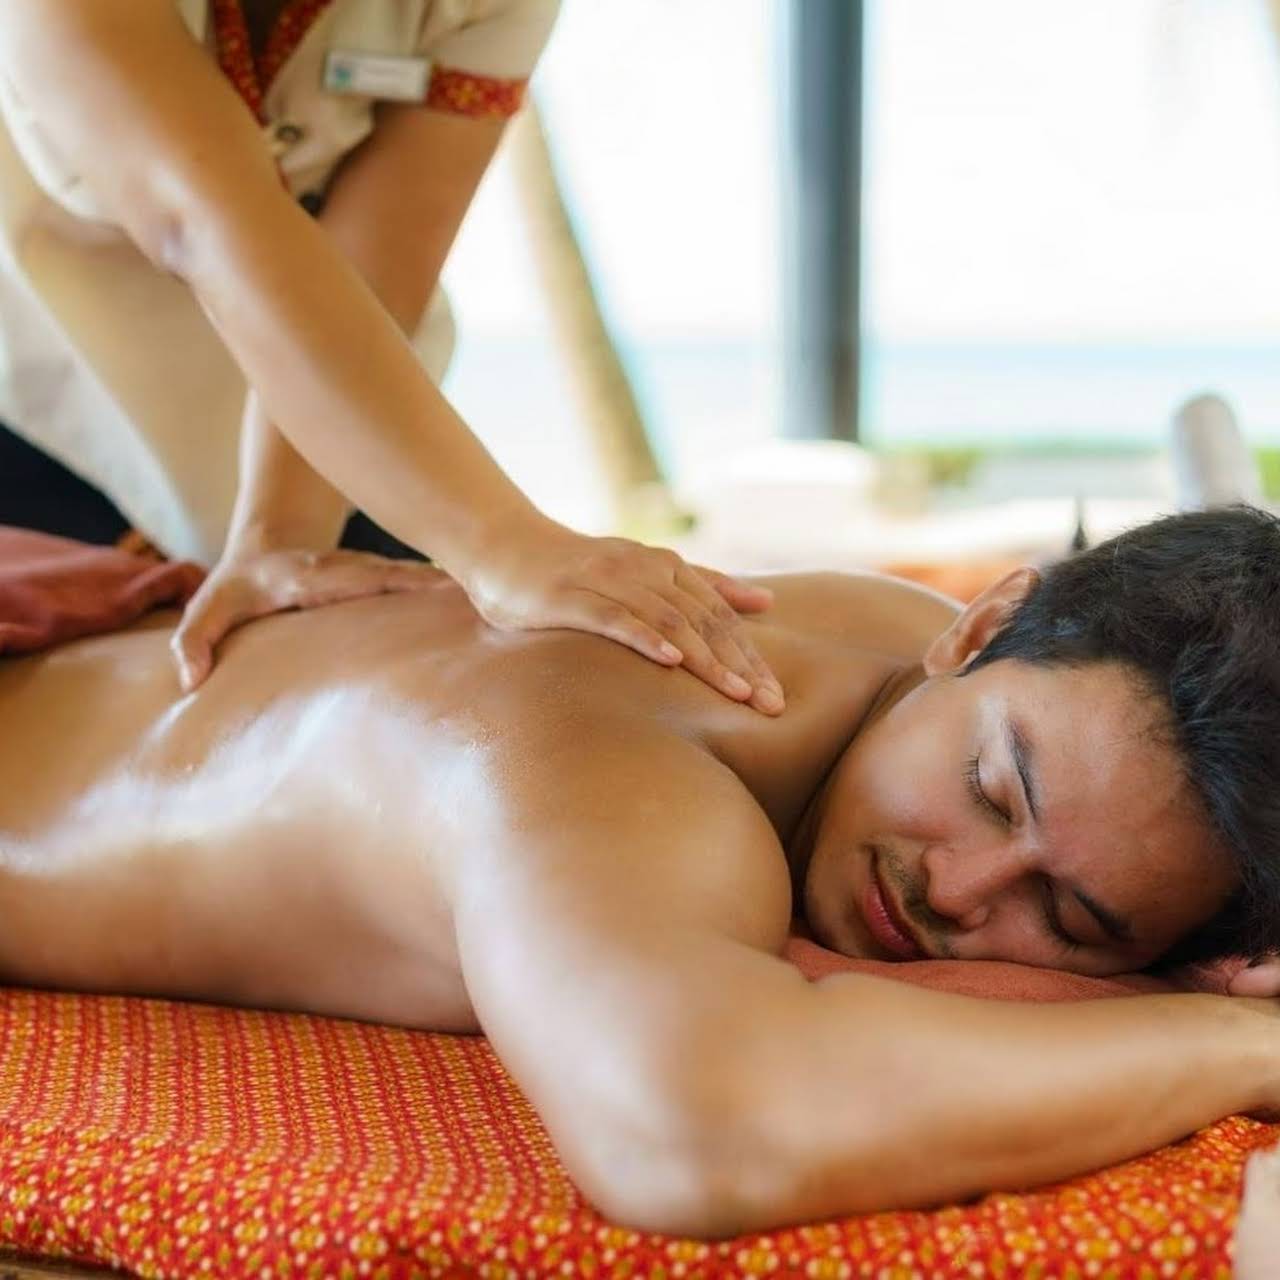 Massage by top models Near Adarsh Nagar 7565871029,Lucknow,Services,Free Classifieds,Post Free Ads,77traders.com